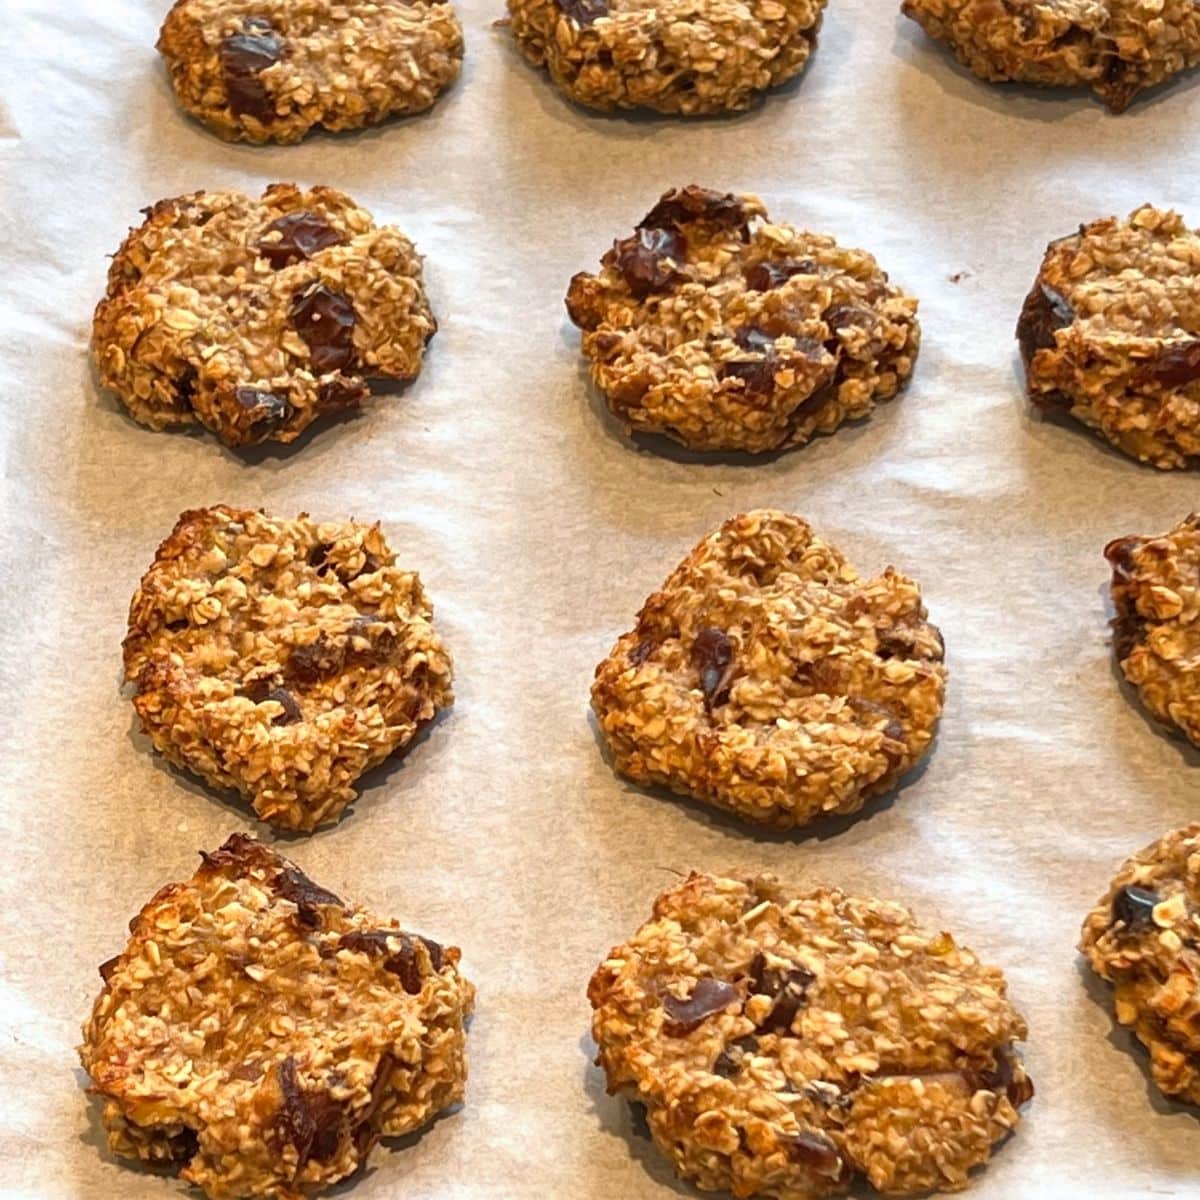 Banana and date oat cookies on a lined baking sheet.